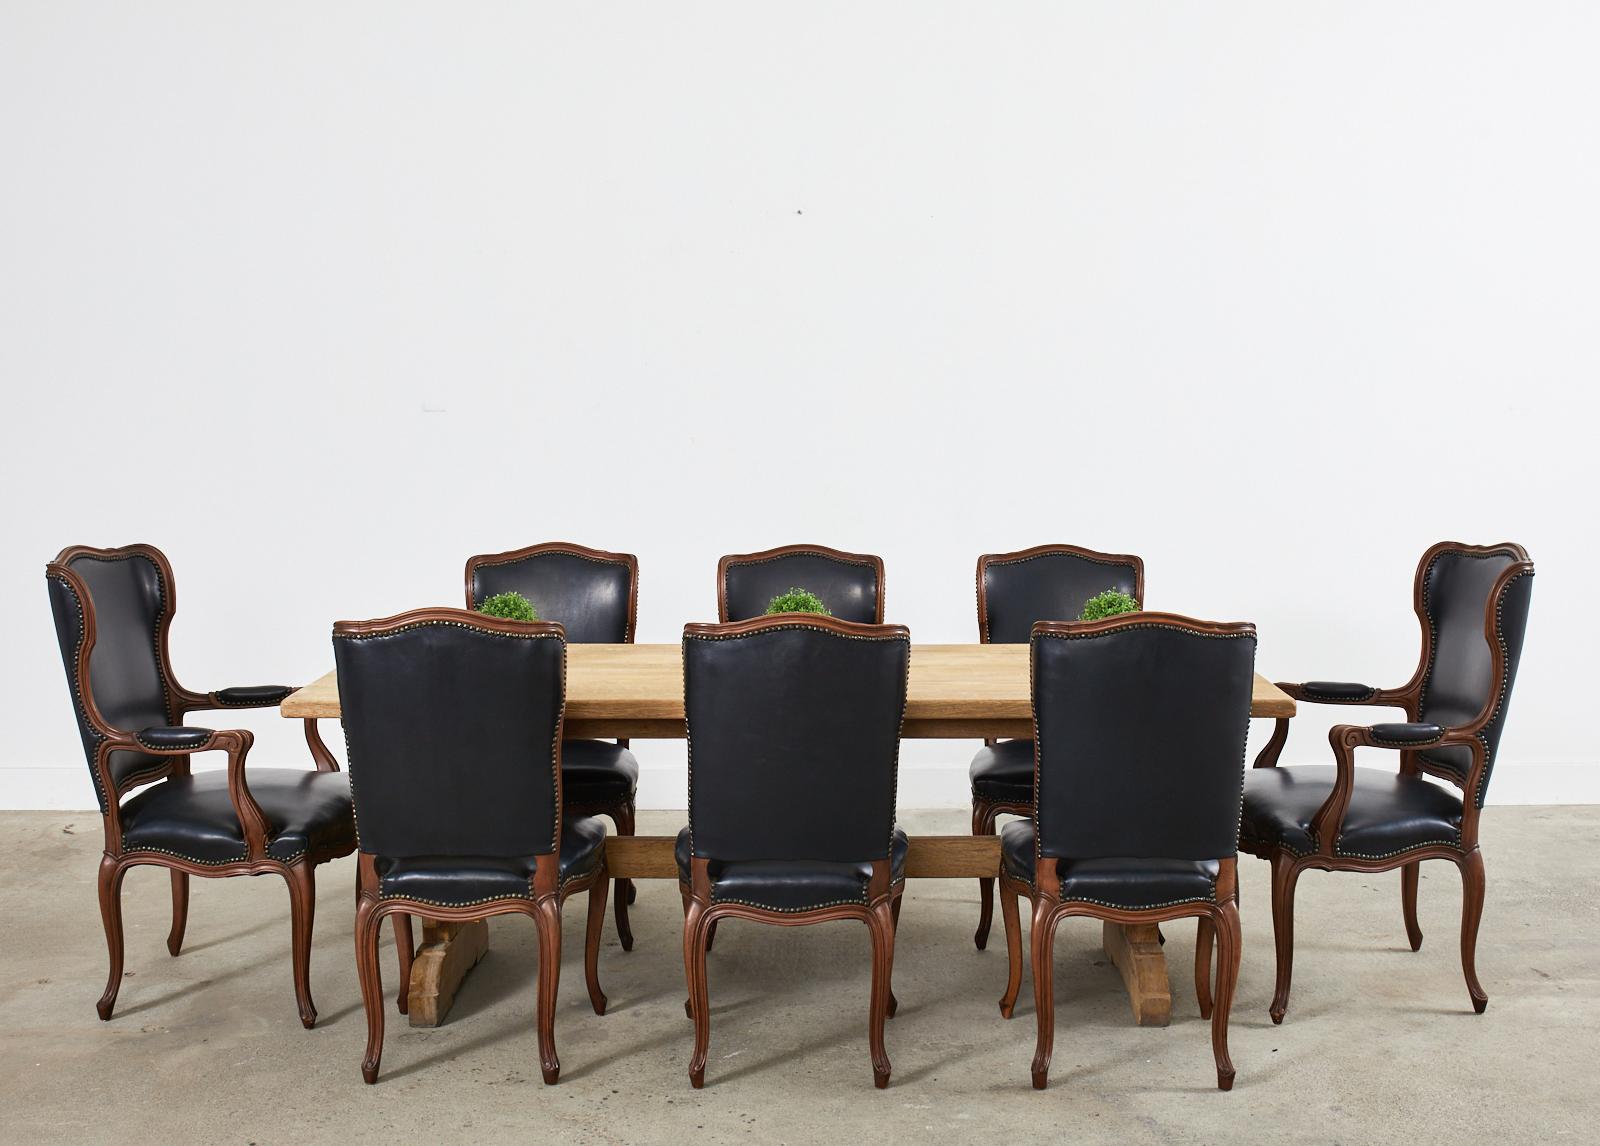 Grand set of twelve bespoke dining chairs a' oreilles or with ears crafted in the French Louis XV taste. The finely molded walnut frames have a humped crest on the back with small wings or ears. The set consists of ten side chairs and two large host